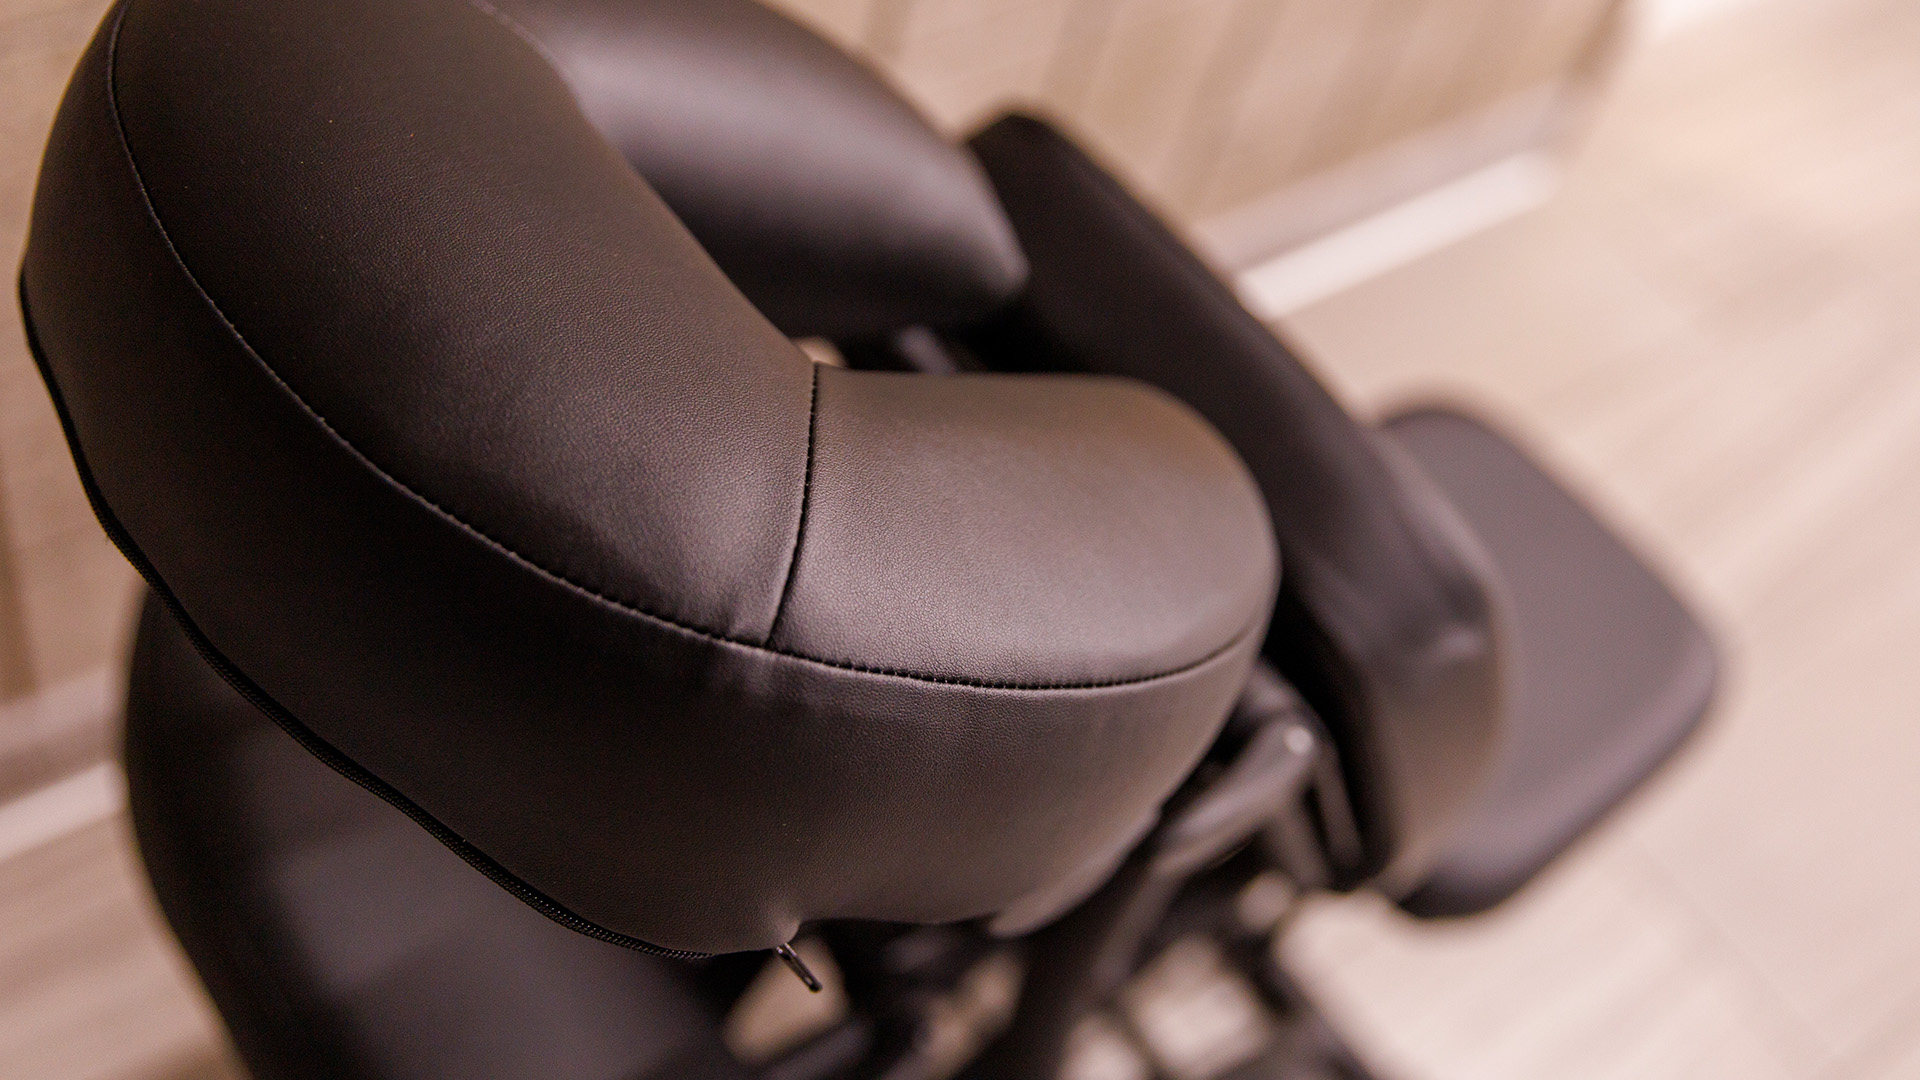 Image of the headrest on the chair used for chair massages at Campus Recreation